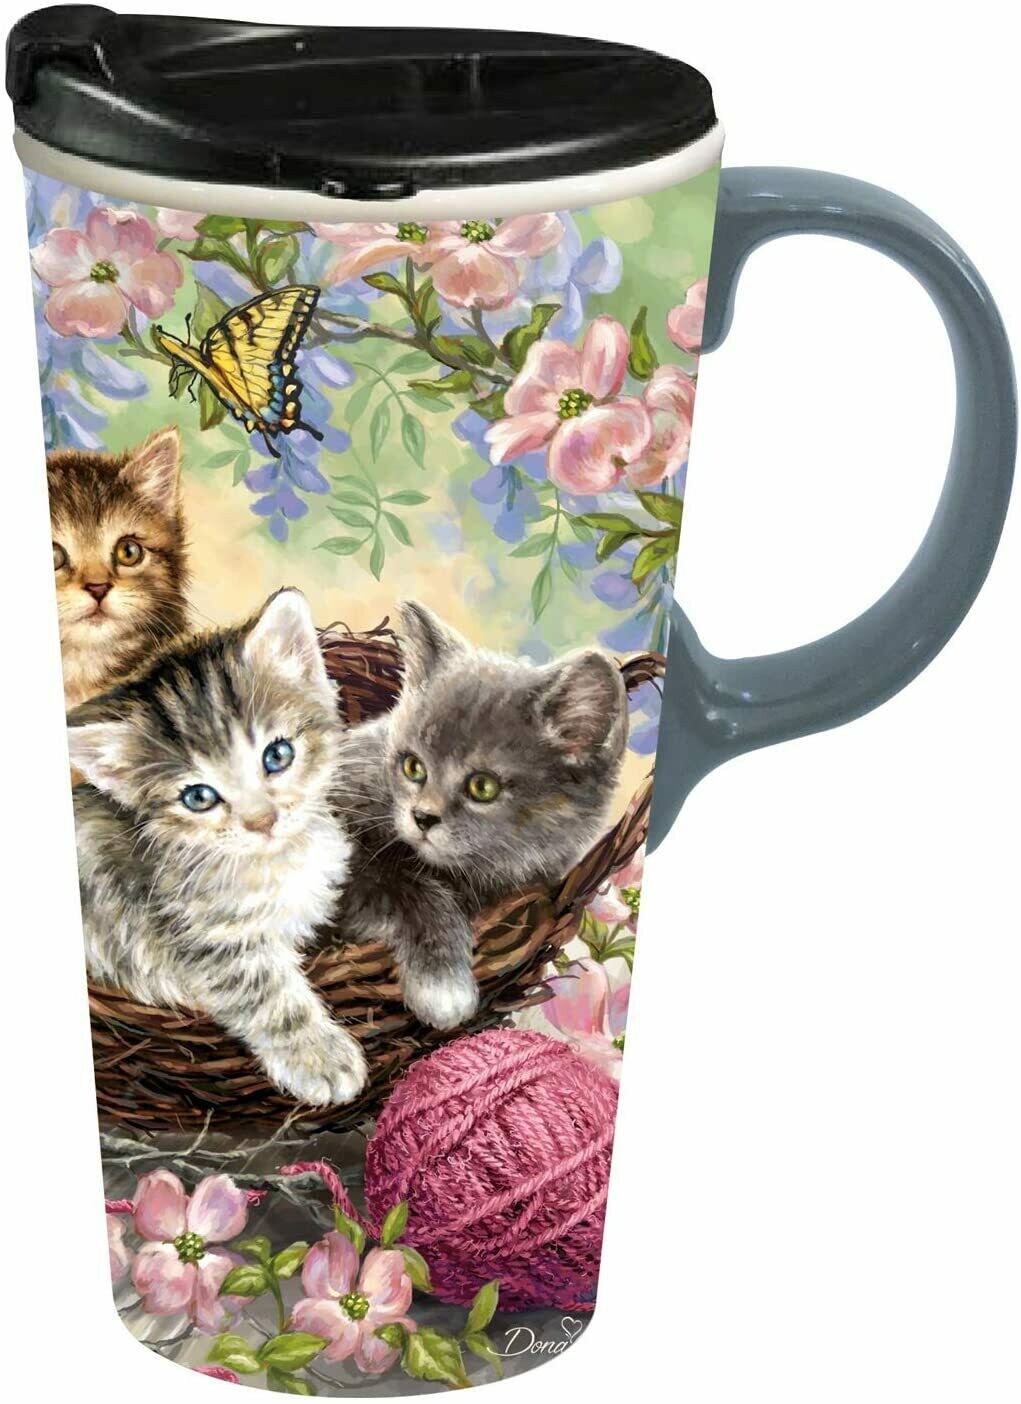 Kittens and Flowers Ceramic Travel Cup